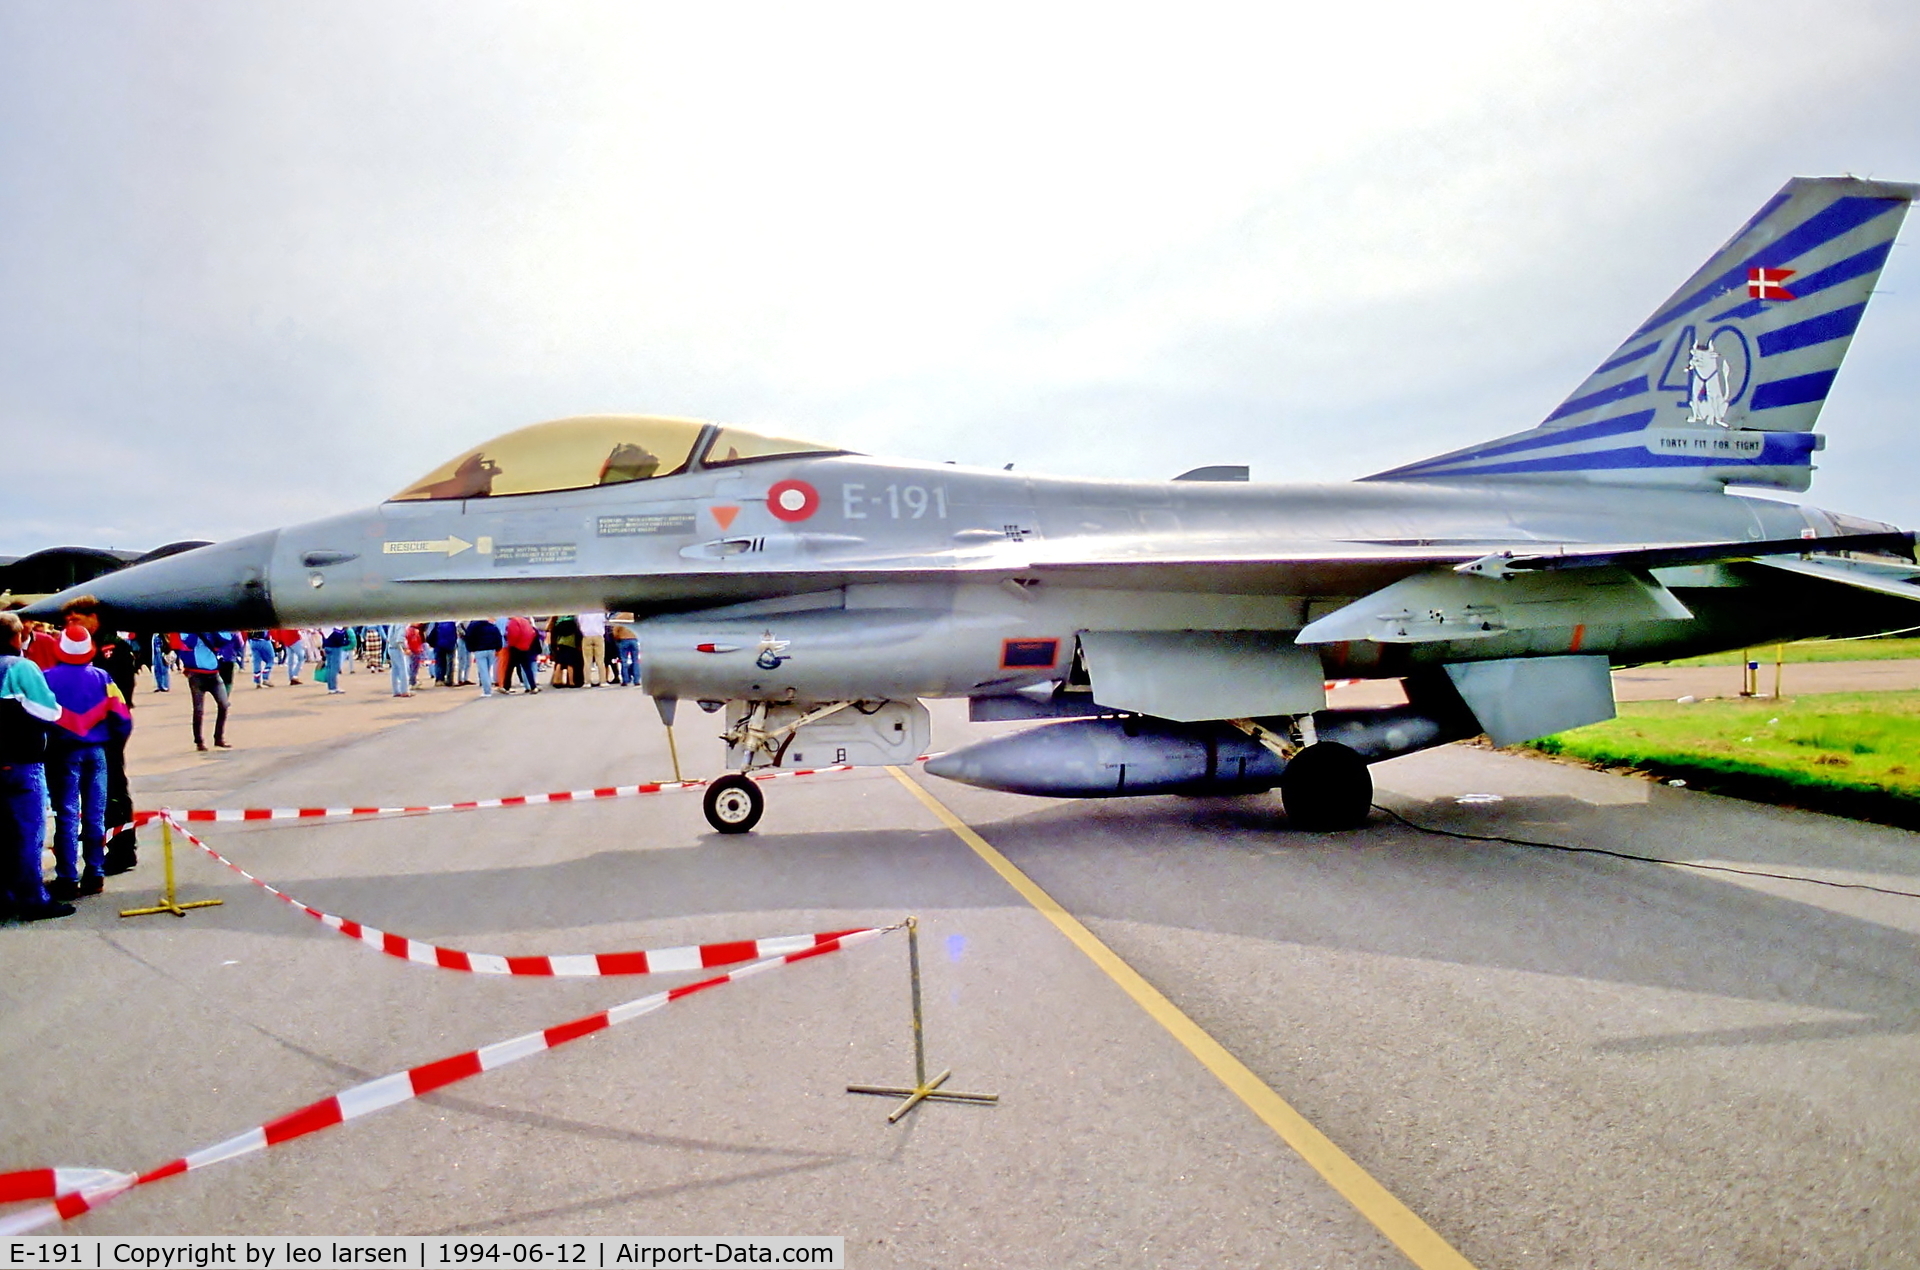 E-191, 1978 SABCA F-16AM Fighting Falcon C/N 6F-18, Vaerloese Air Base 12.6.94with esk 730 forty fit for fight Bul